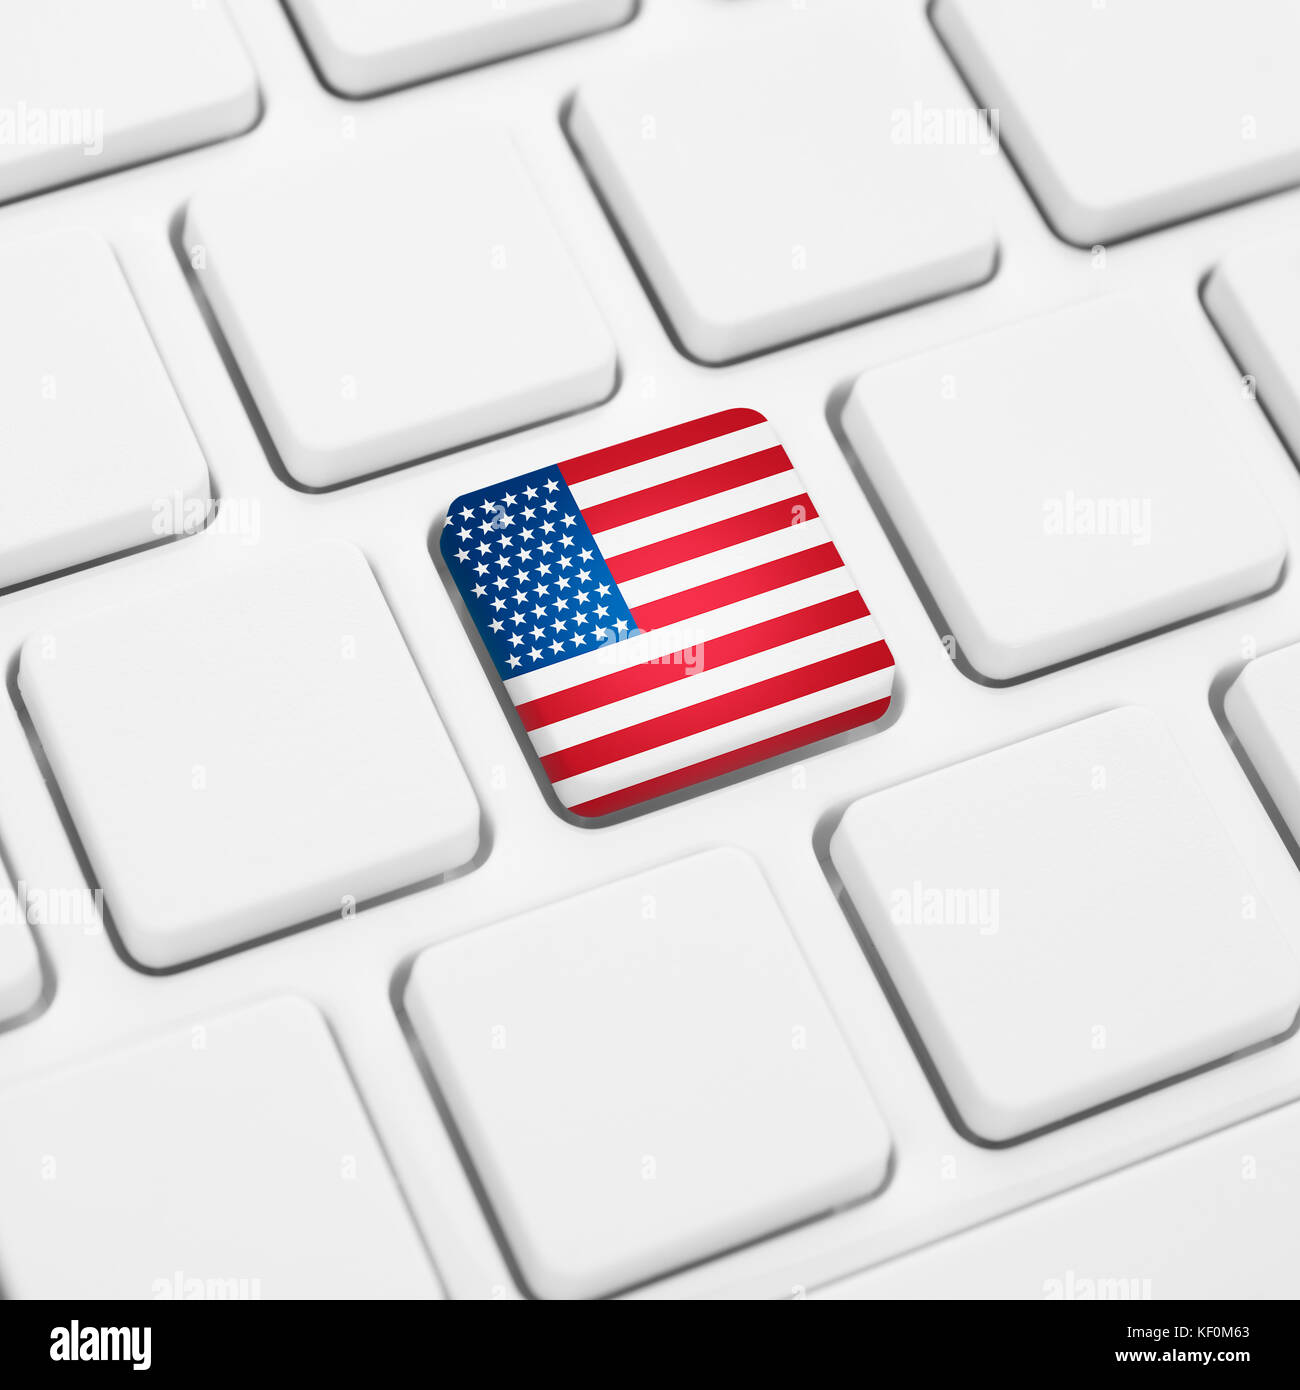 United States of America or Usa web concept english language.National flag button or key on keyboard Stock Photo